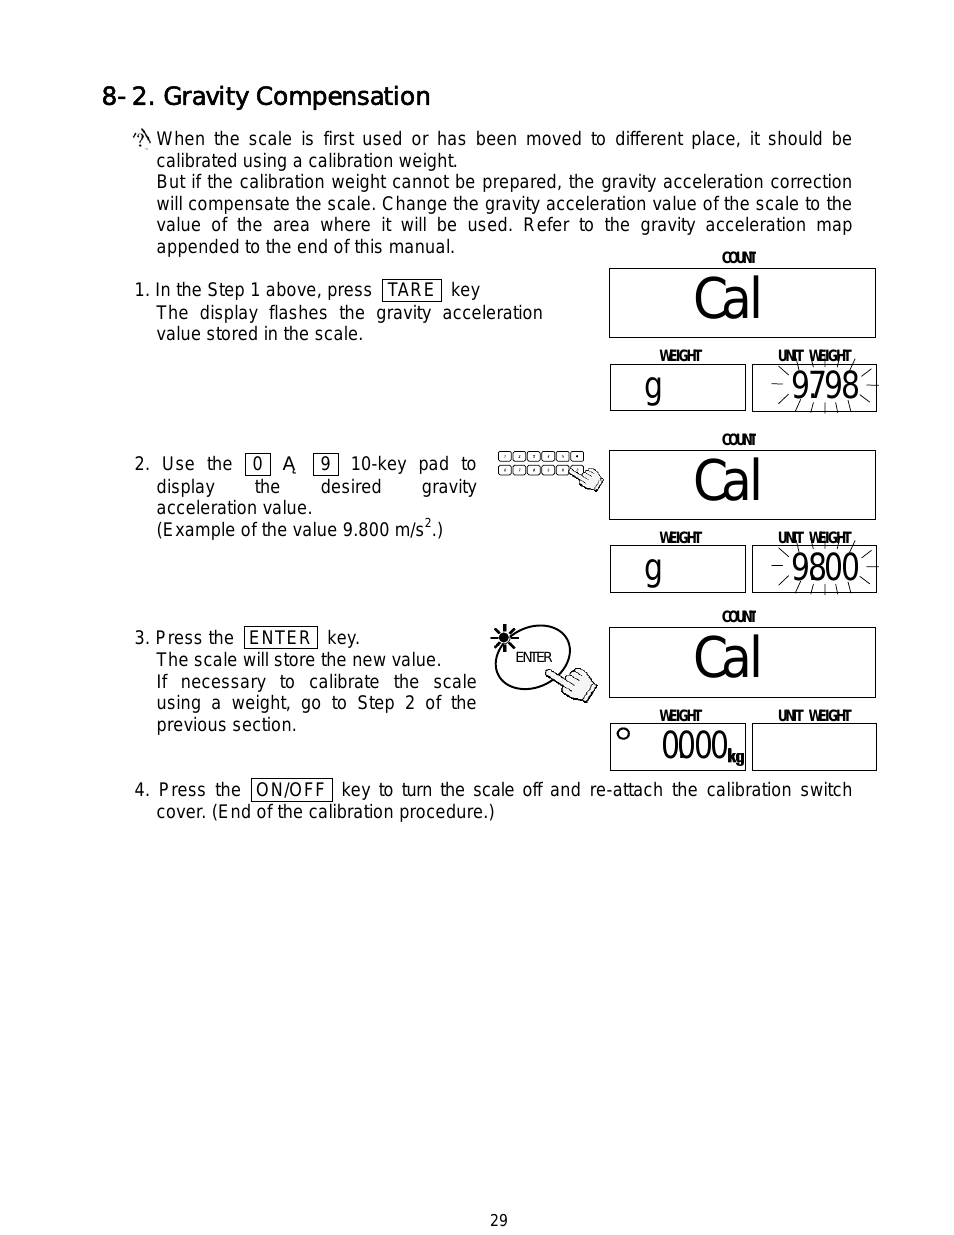 Counting Scale HC-6Ki (Page 31)